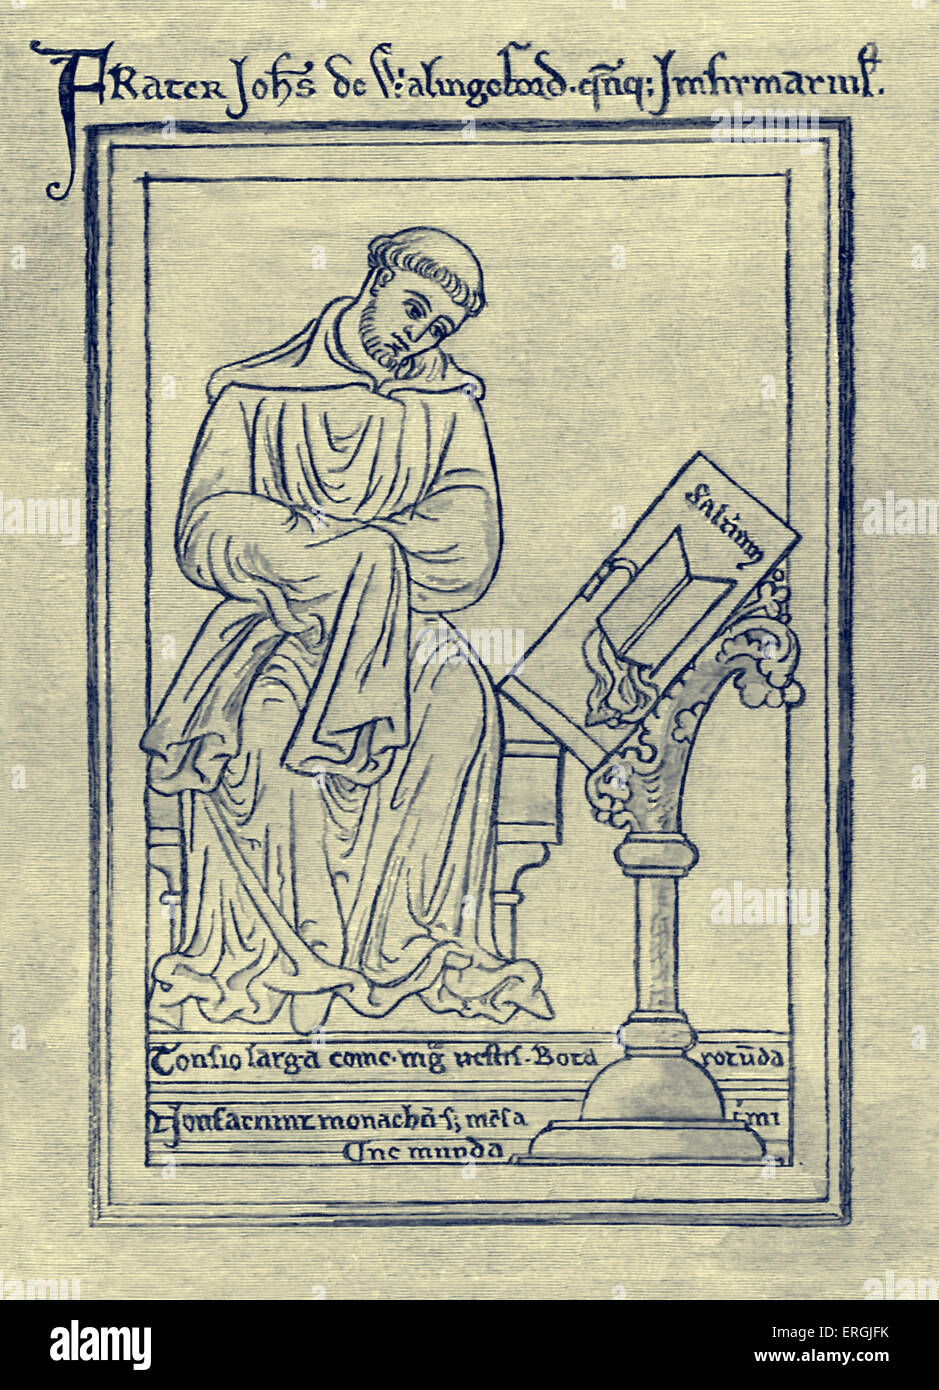 John of Wallingford, Monk of St Albans Abbey, Hertfordshire, England and chronicler. Lived 1231 - 1258. From drawing attributed to Matthew Paris. Stock Photo